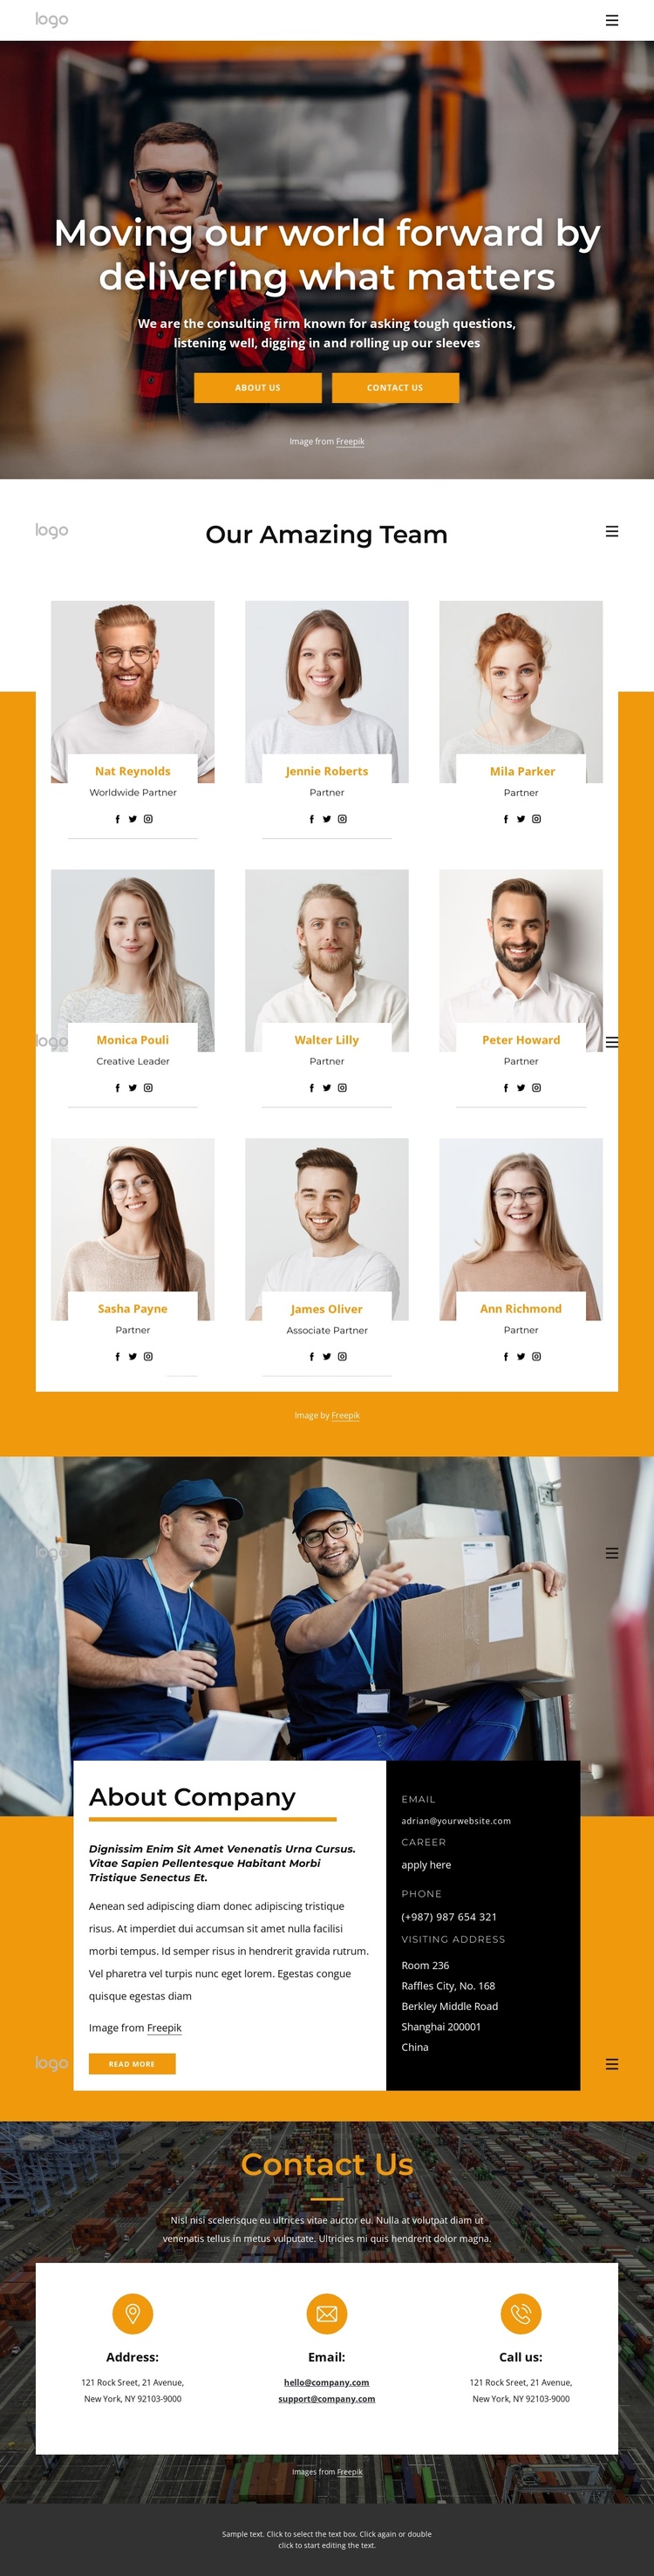 International parcel delivery company One Page Template